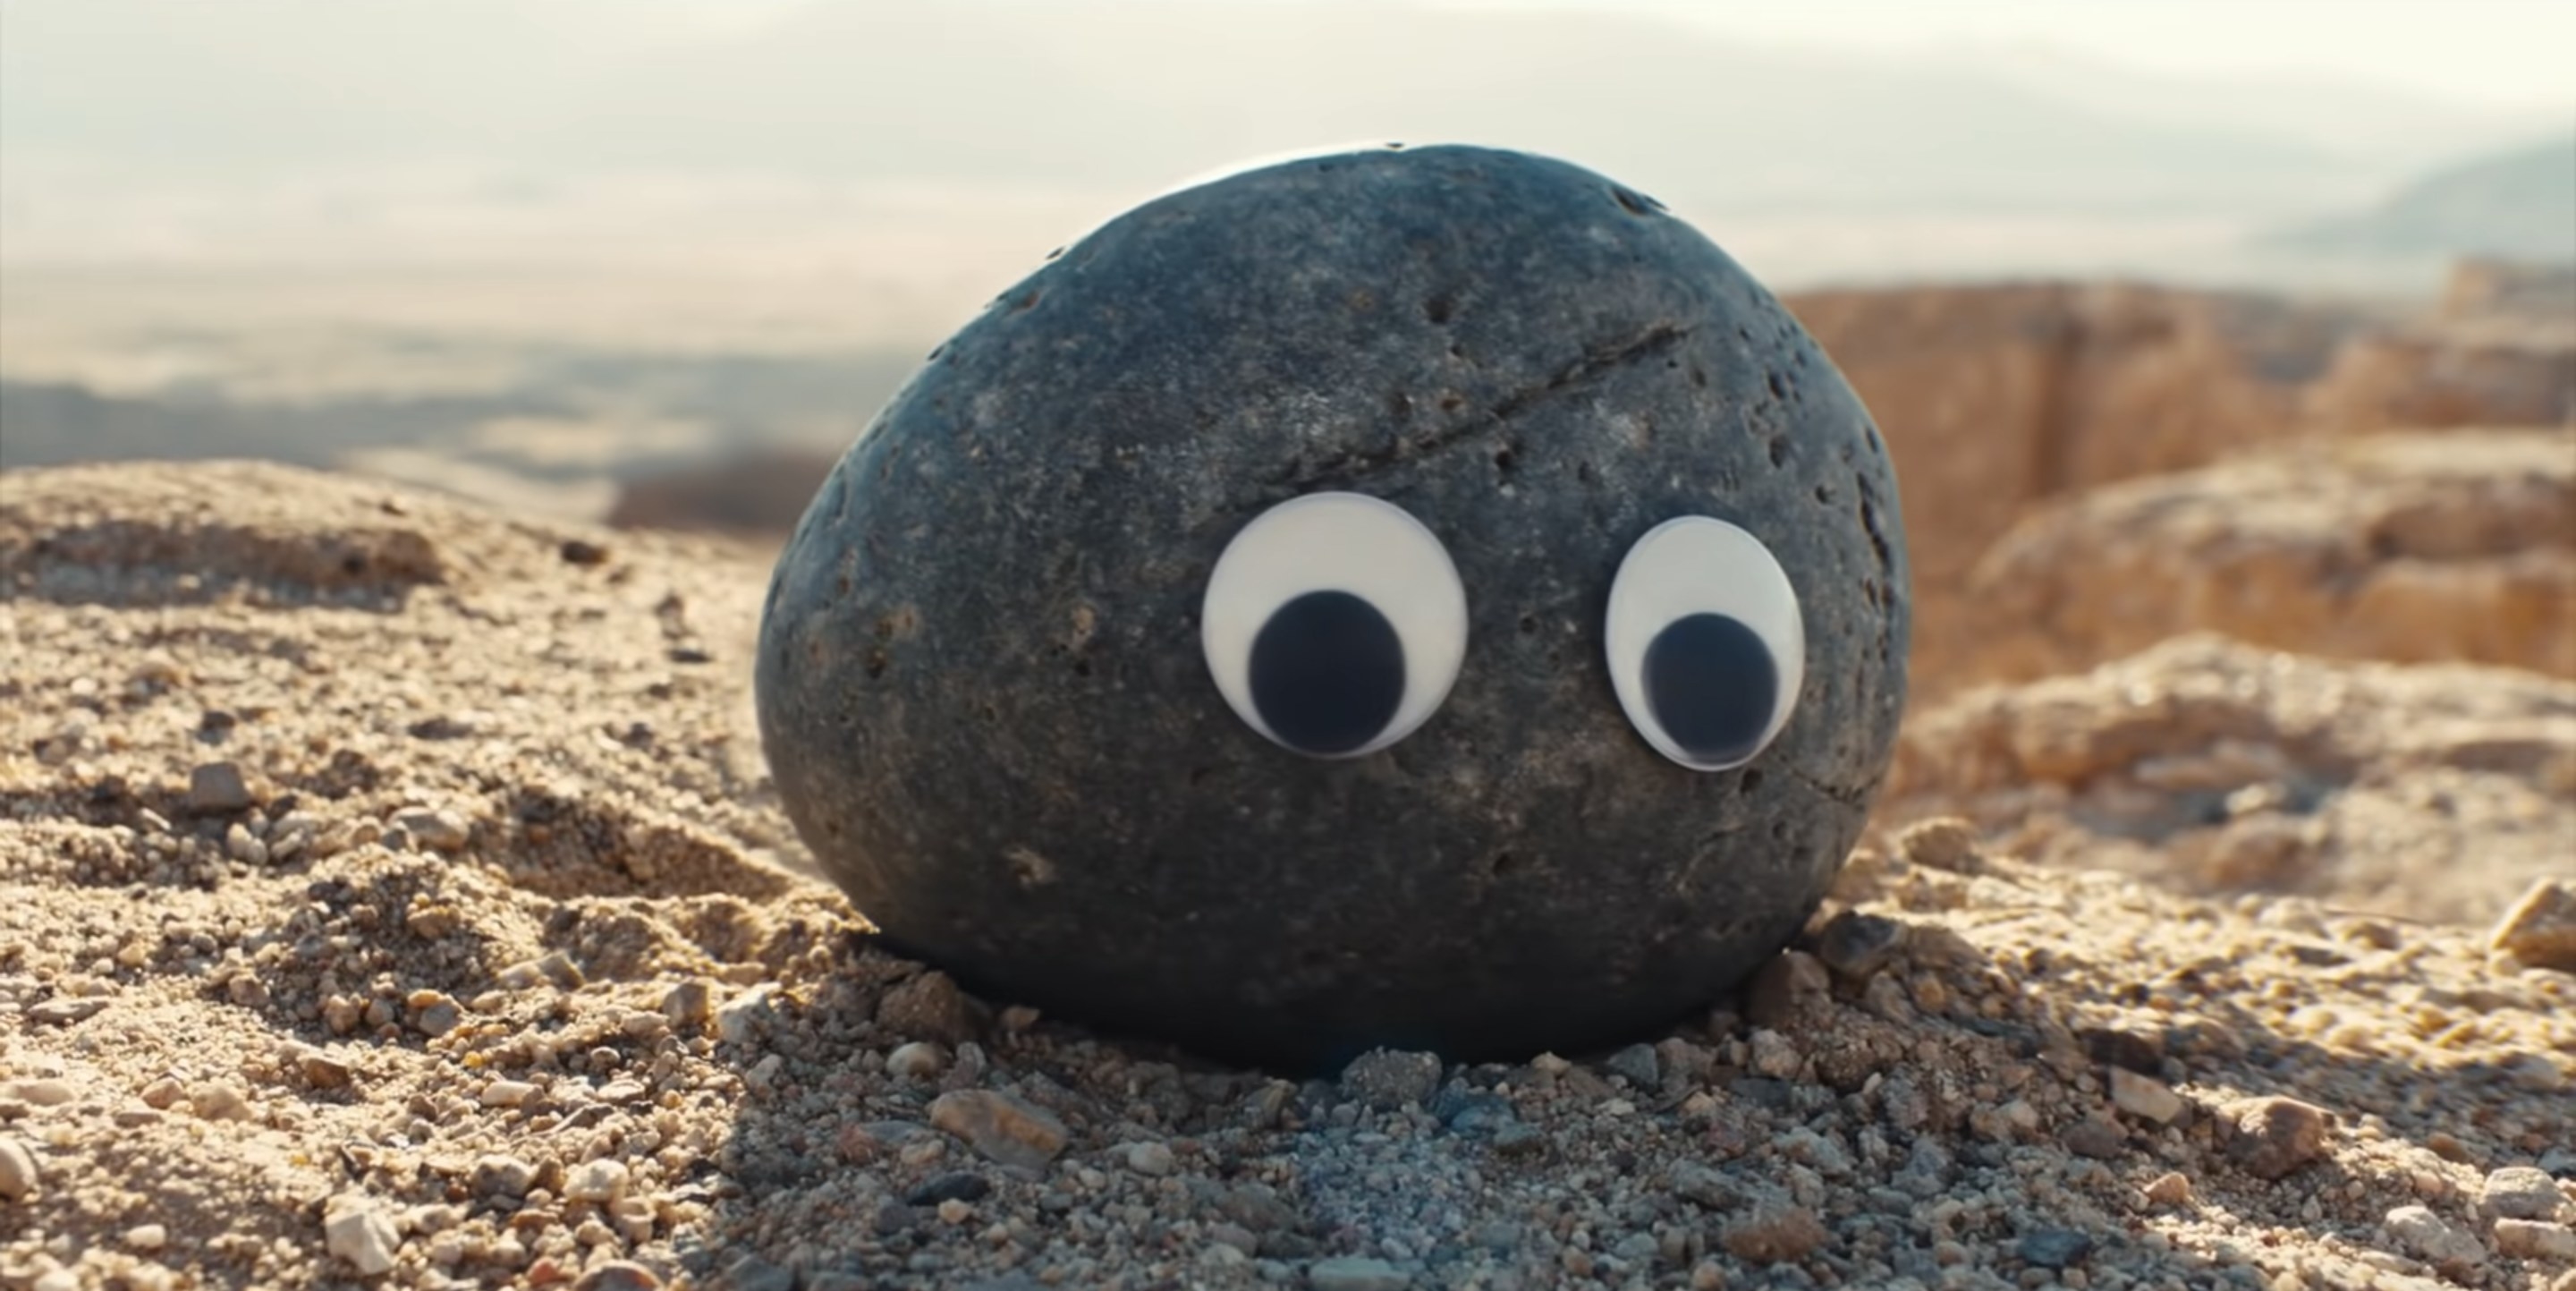 Evelyn as a rock with googly eyes